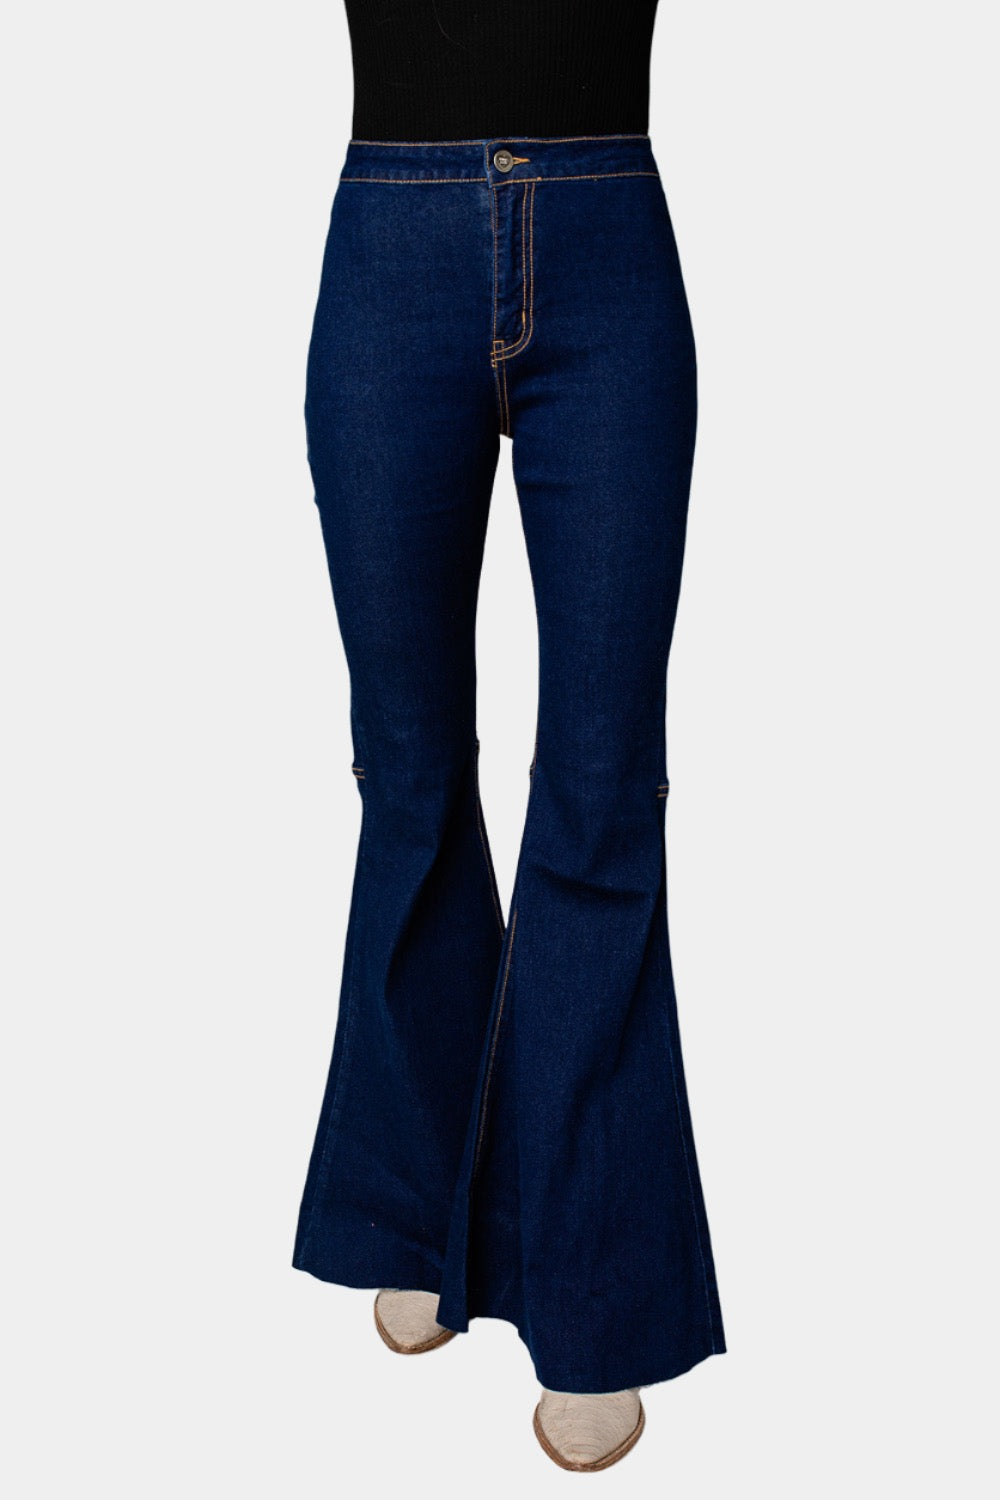 Buy Friends Like These Blue High Waist Pocket Flare Jeans from the